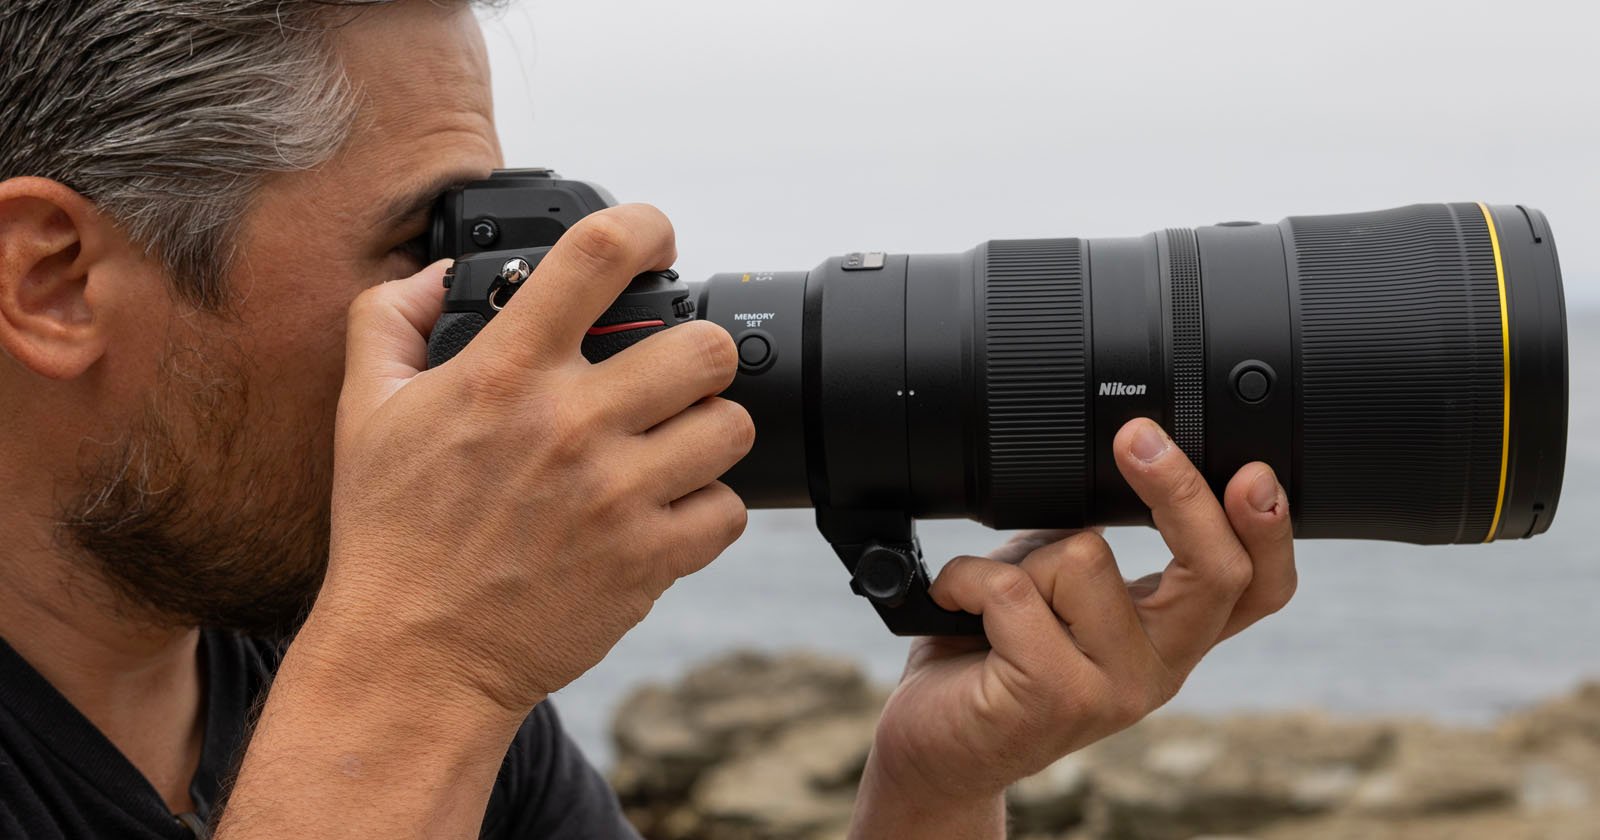 Nikons New 600mm f/6.3 VR S Super-Telephoto is the Lightest in its Class